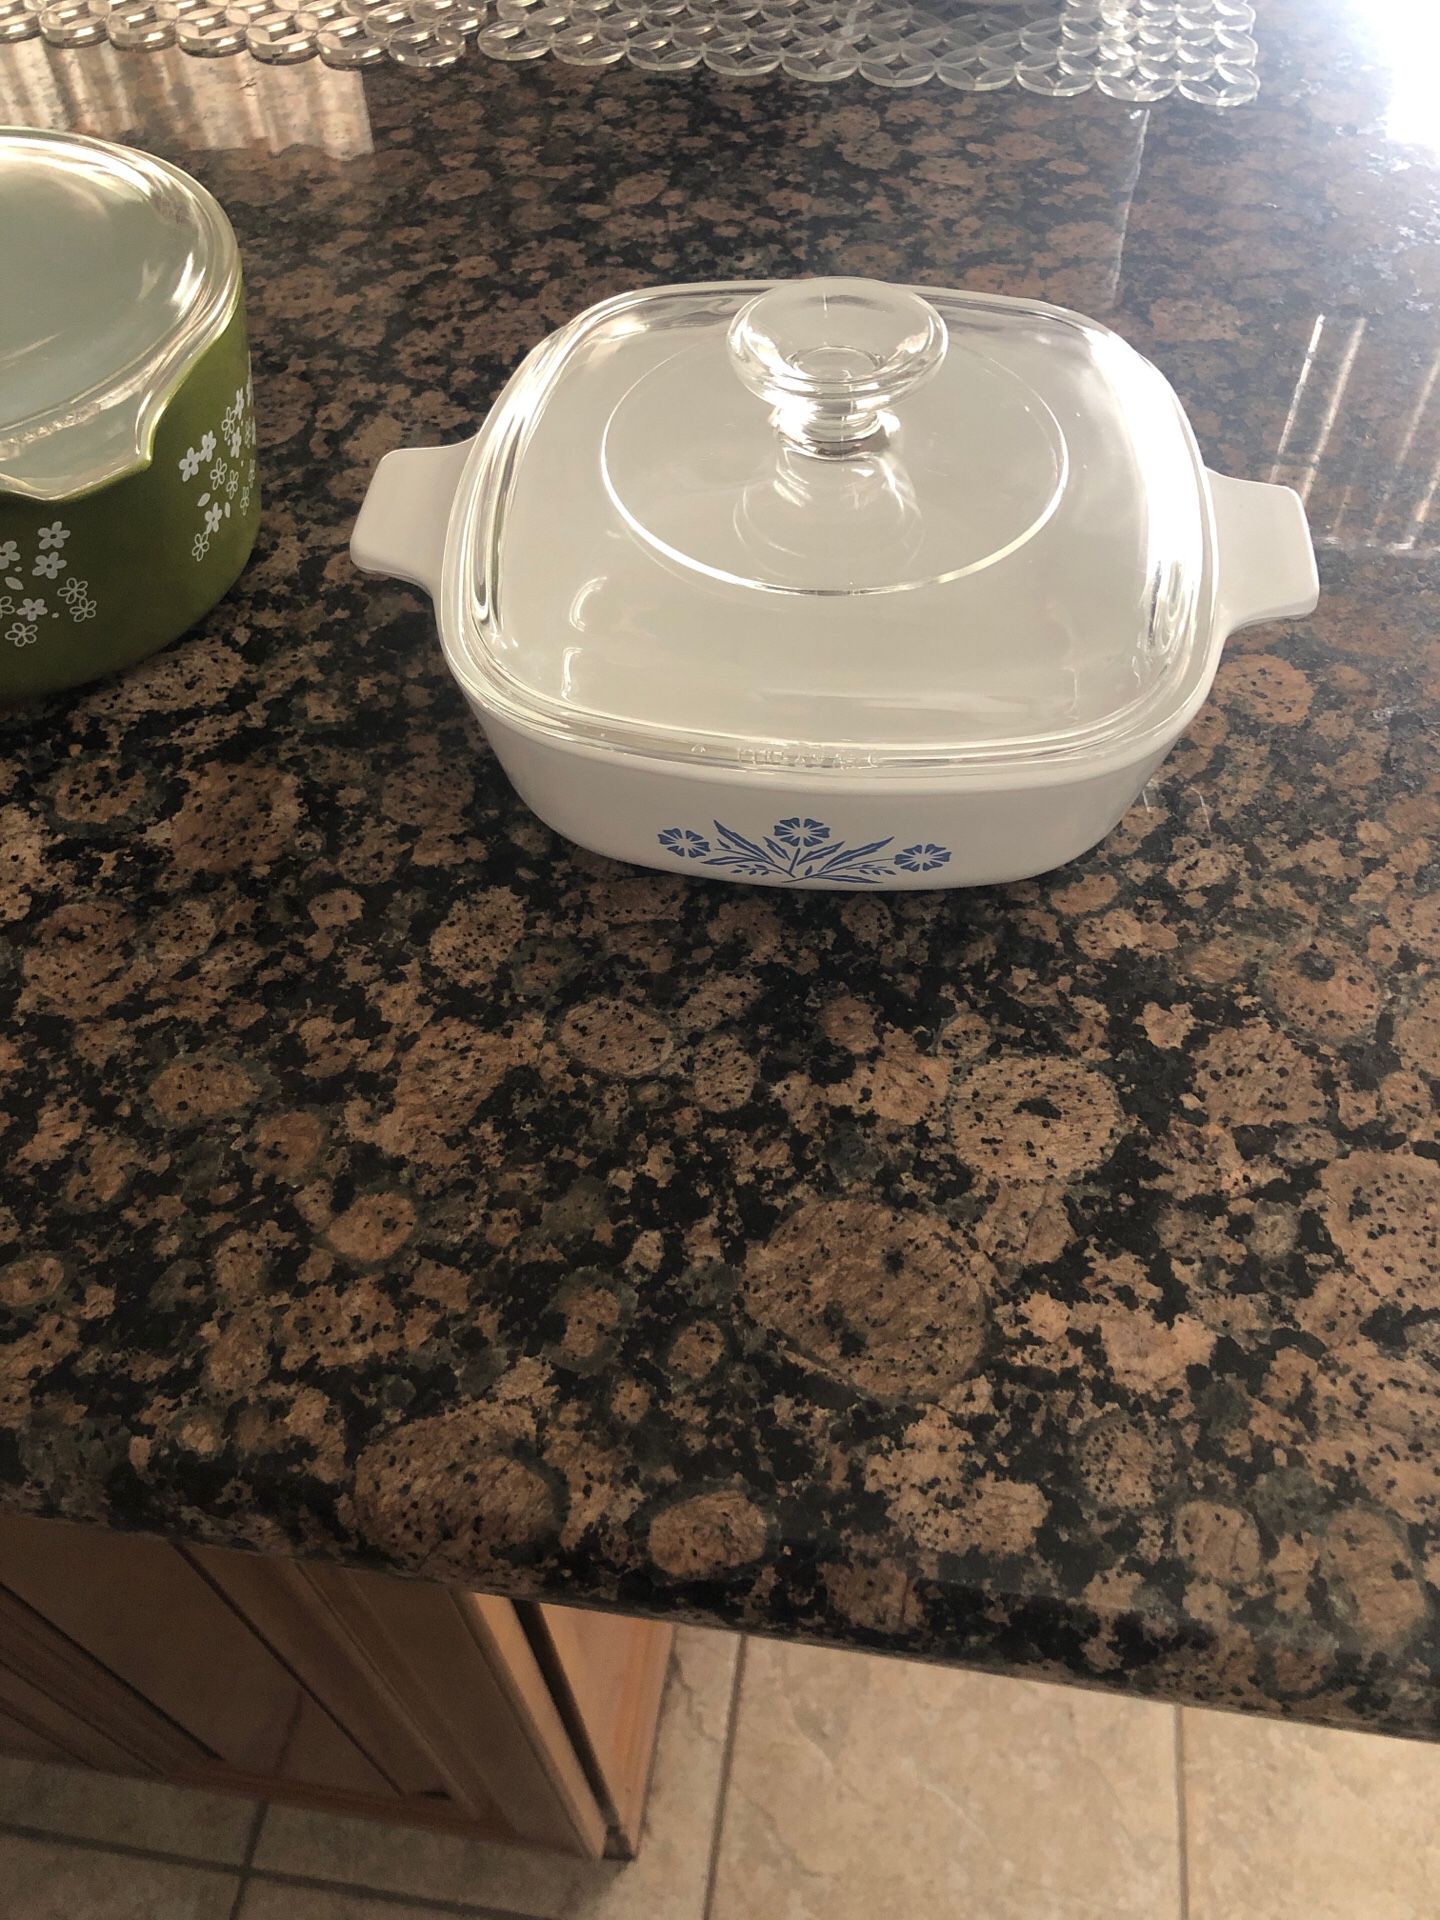 Pyrex and Corning Ware open box new